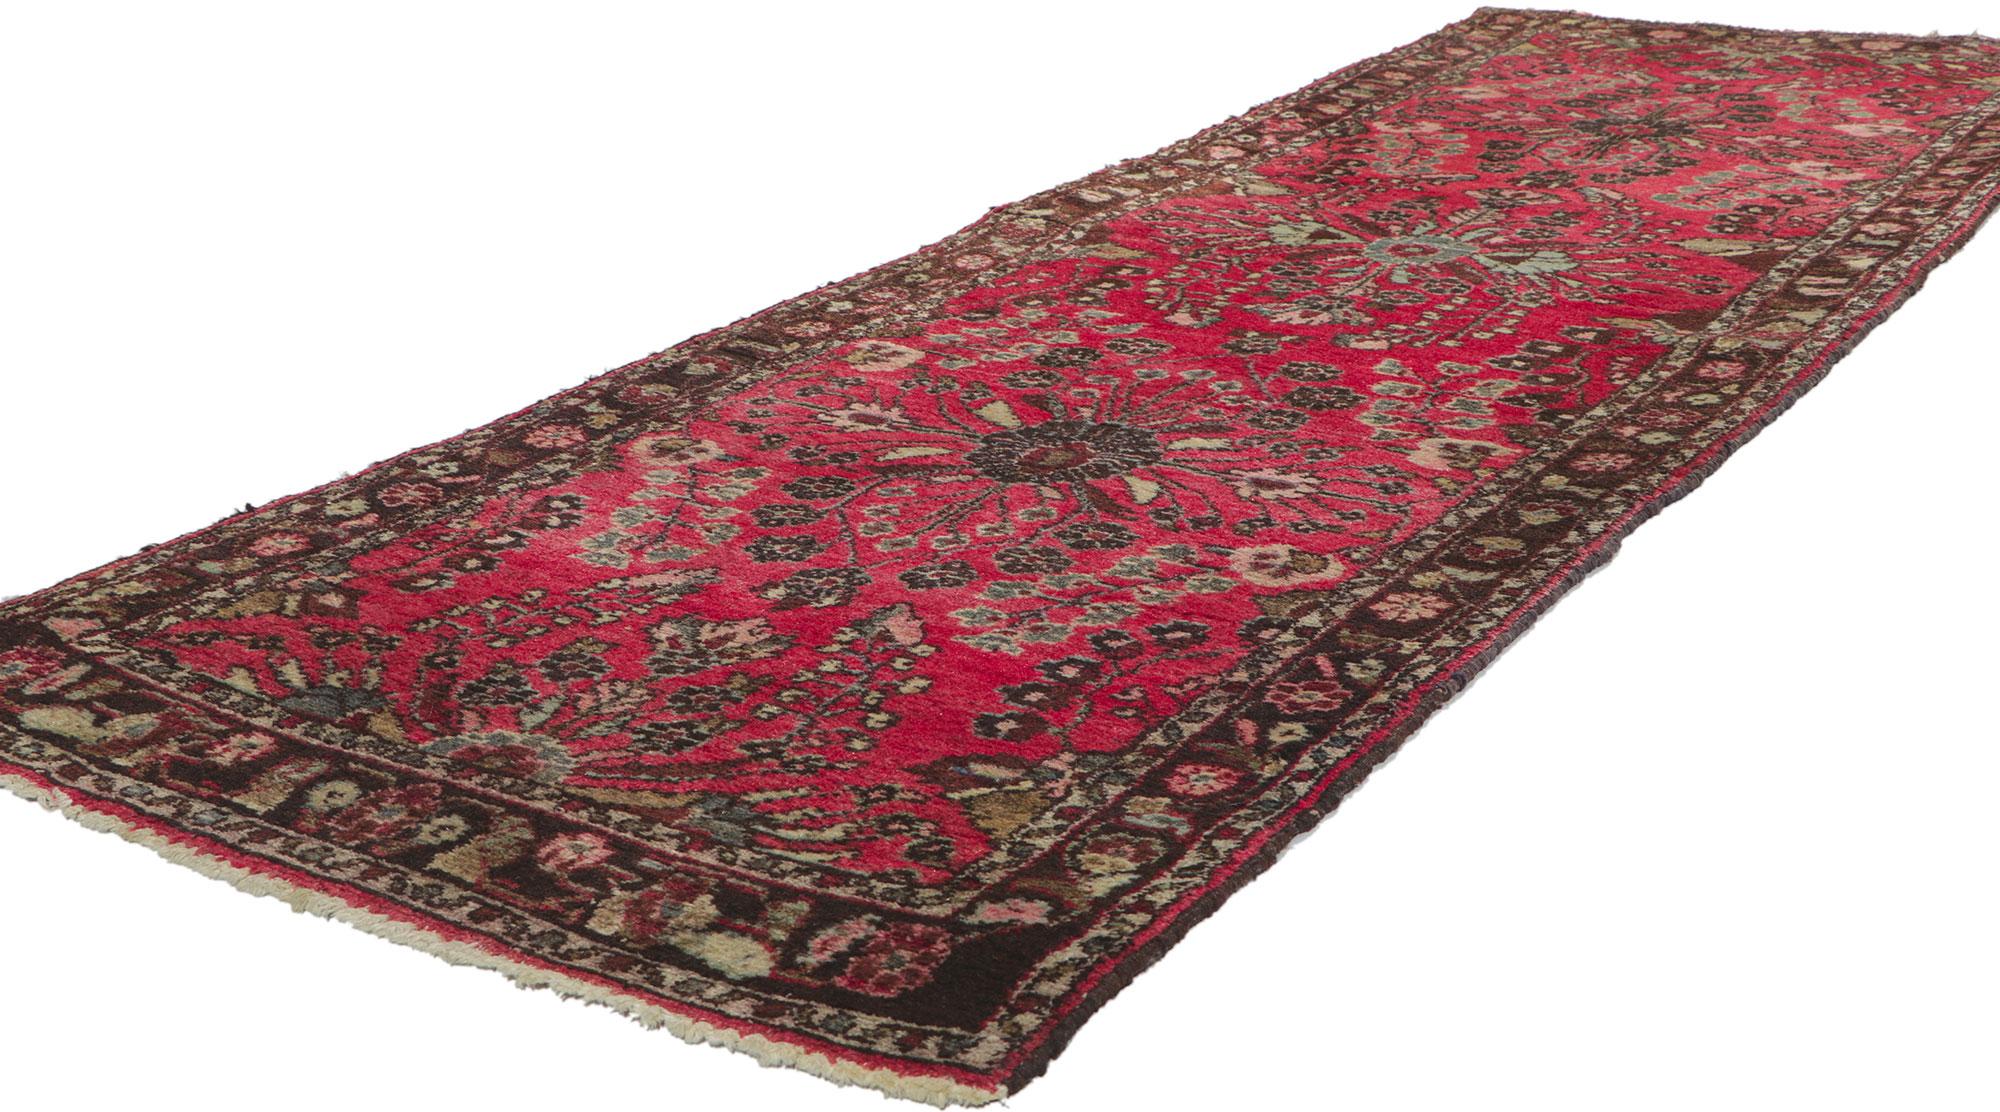 78141 antique Persian Lilihan Runner, 02'08 x 08'05. With its effortless beauty and timeless design, this hand knotted wool antique Persian Lilihan carpet runner will take on a curated lived-in look that feels timeless while imparting a sense of